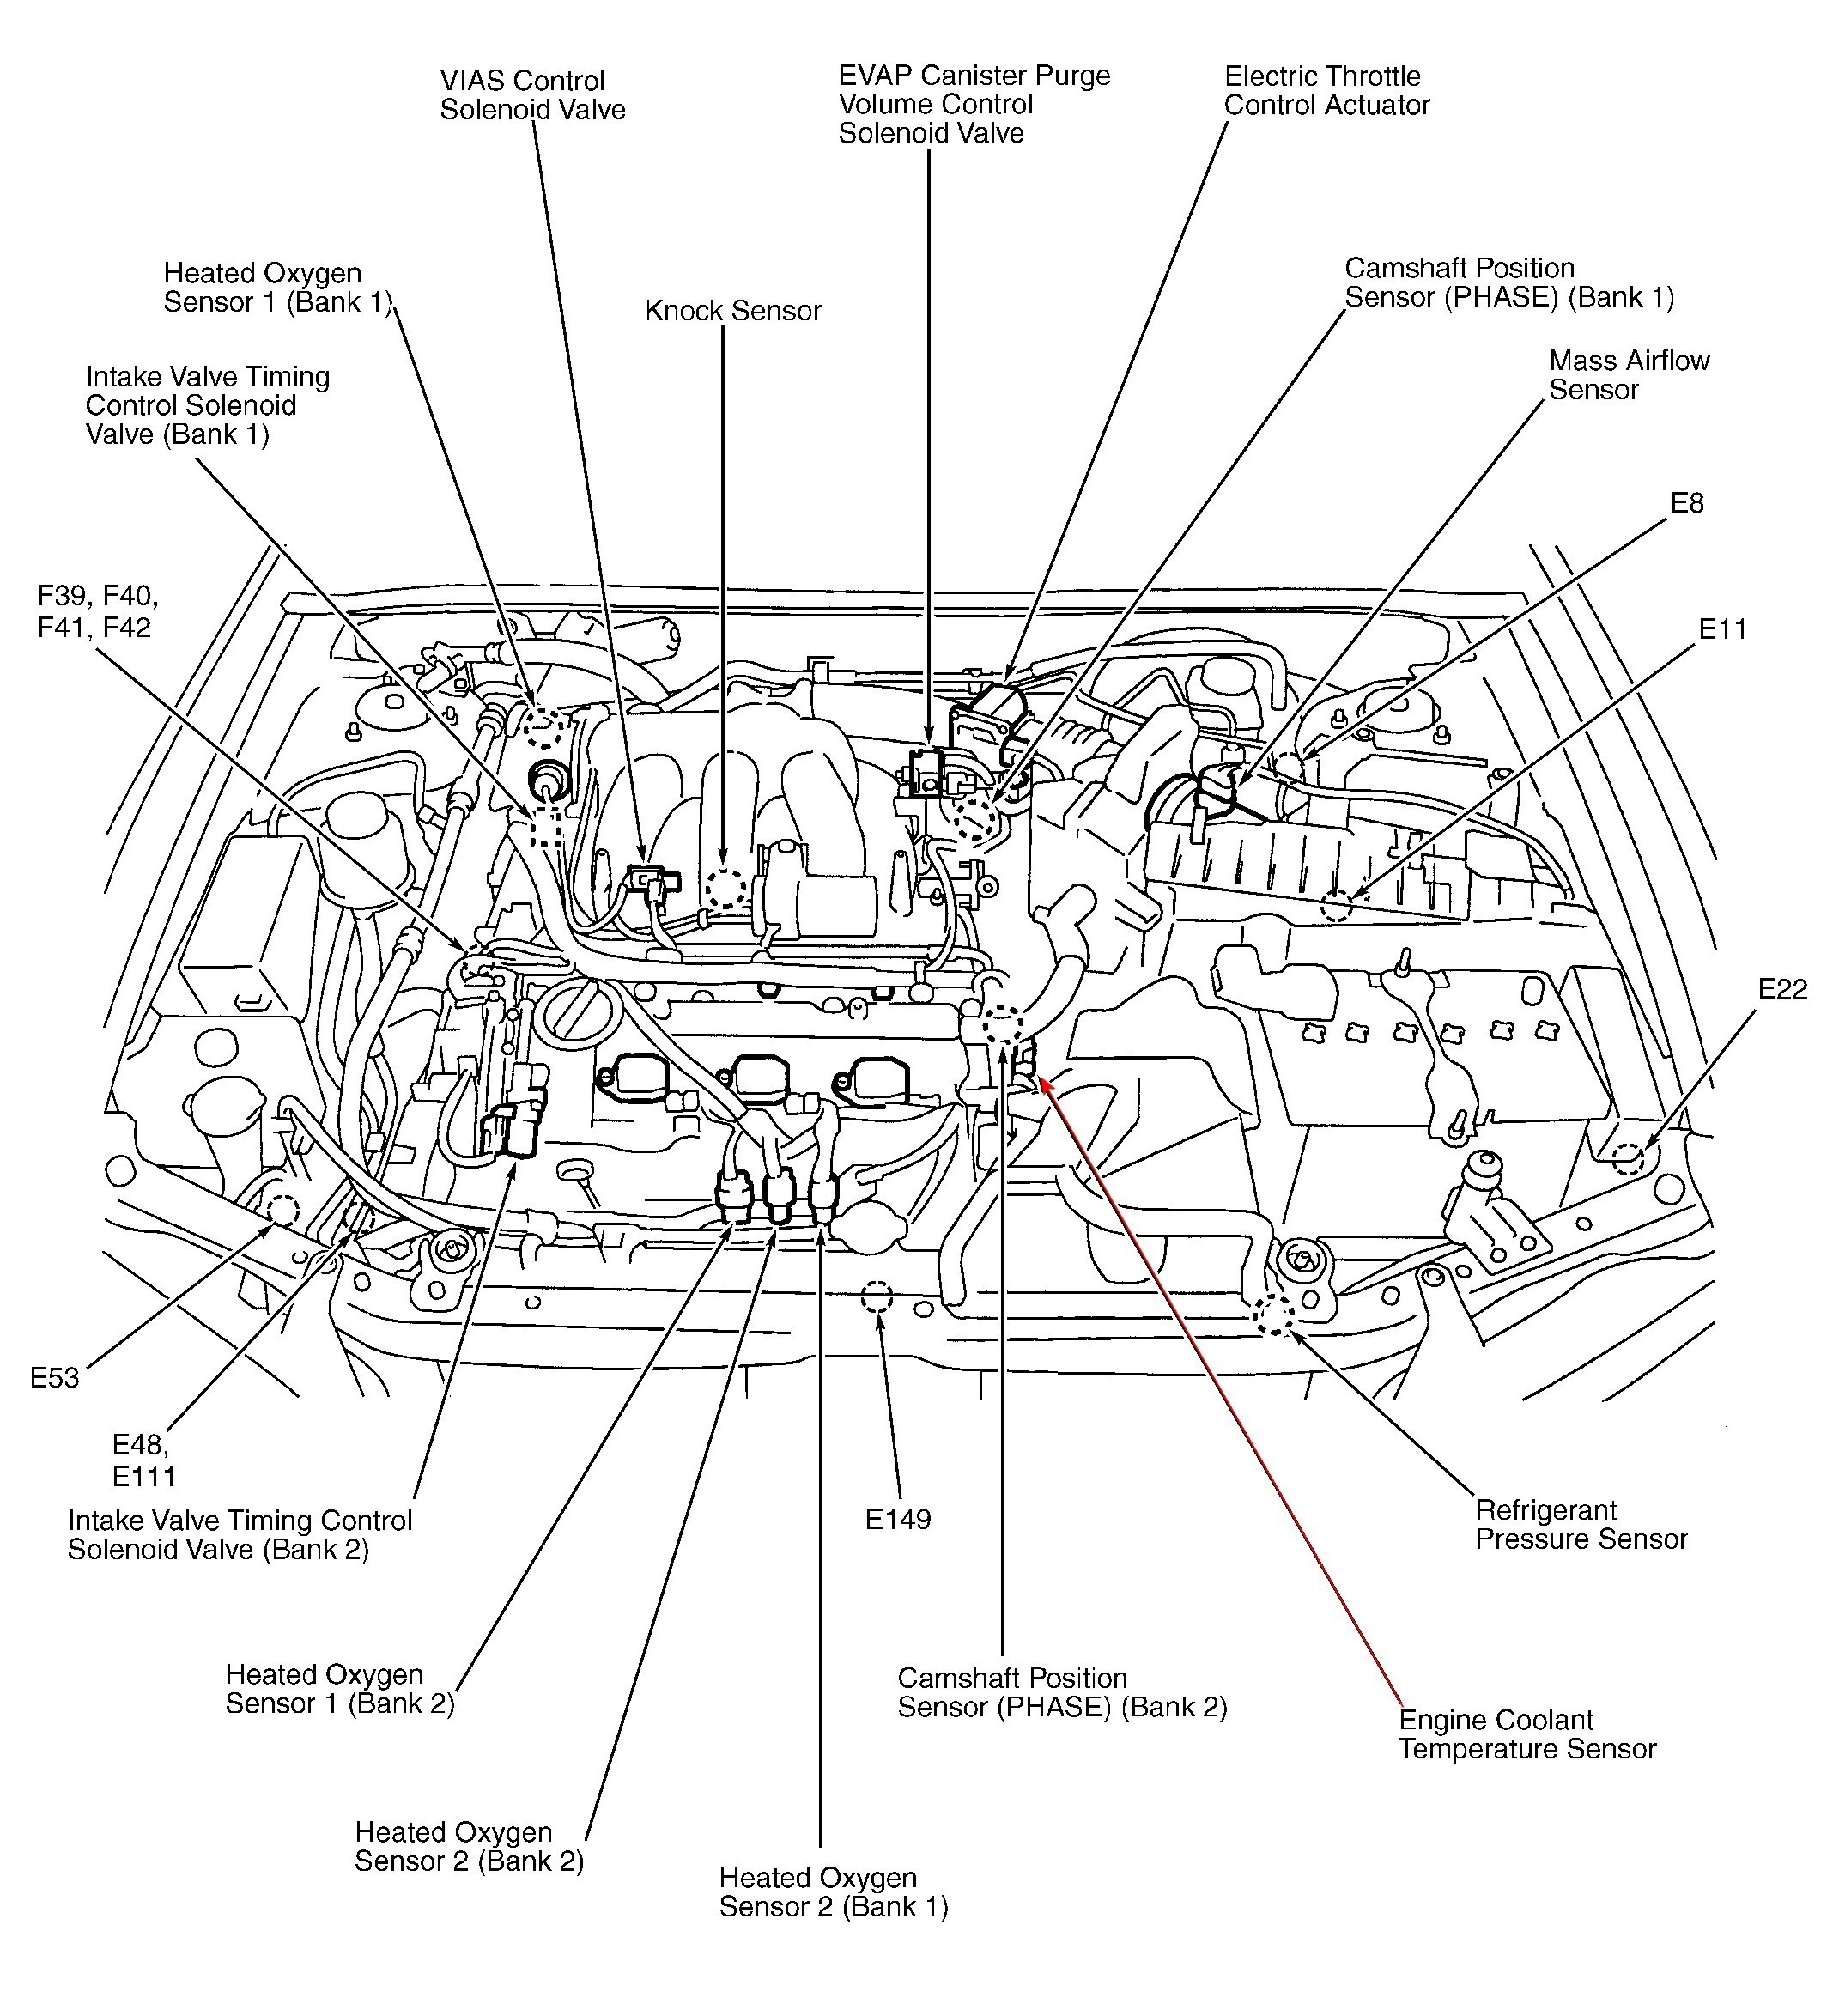 Parts Of An Engine Diagram Engine Parts Diagram with Dimensions Car Parts Labeled Diagram Of Parts Of An Engine Diagram